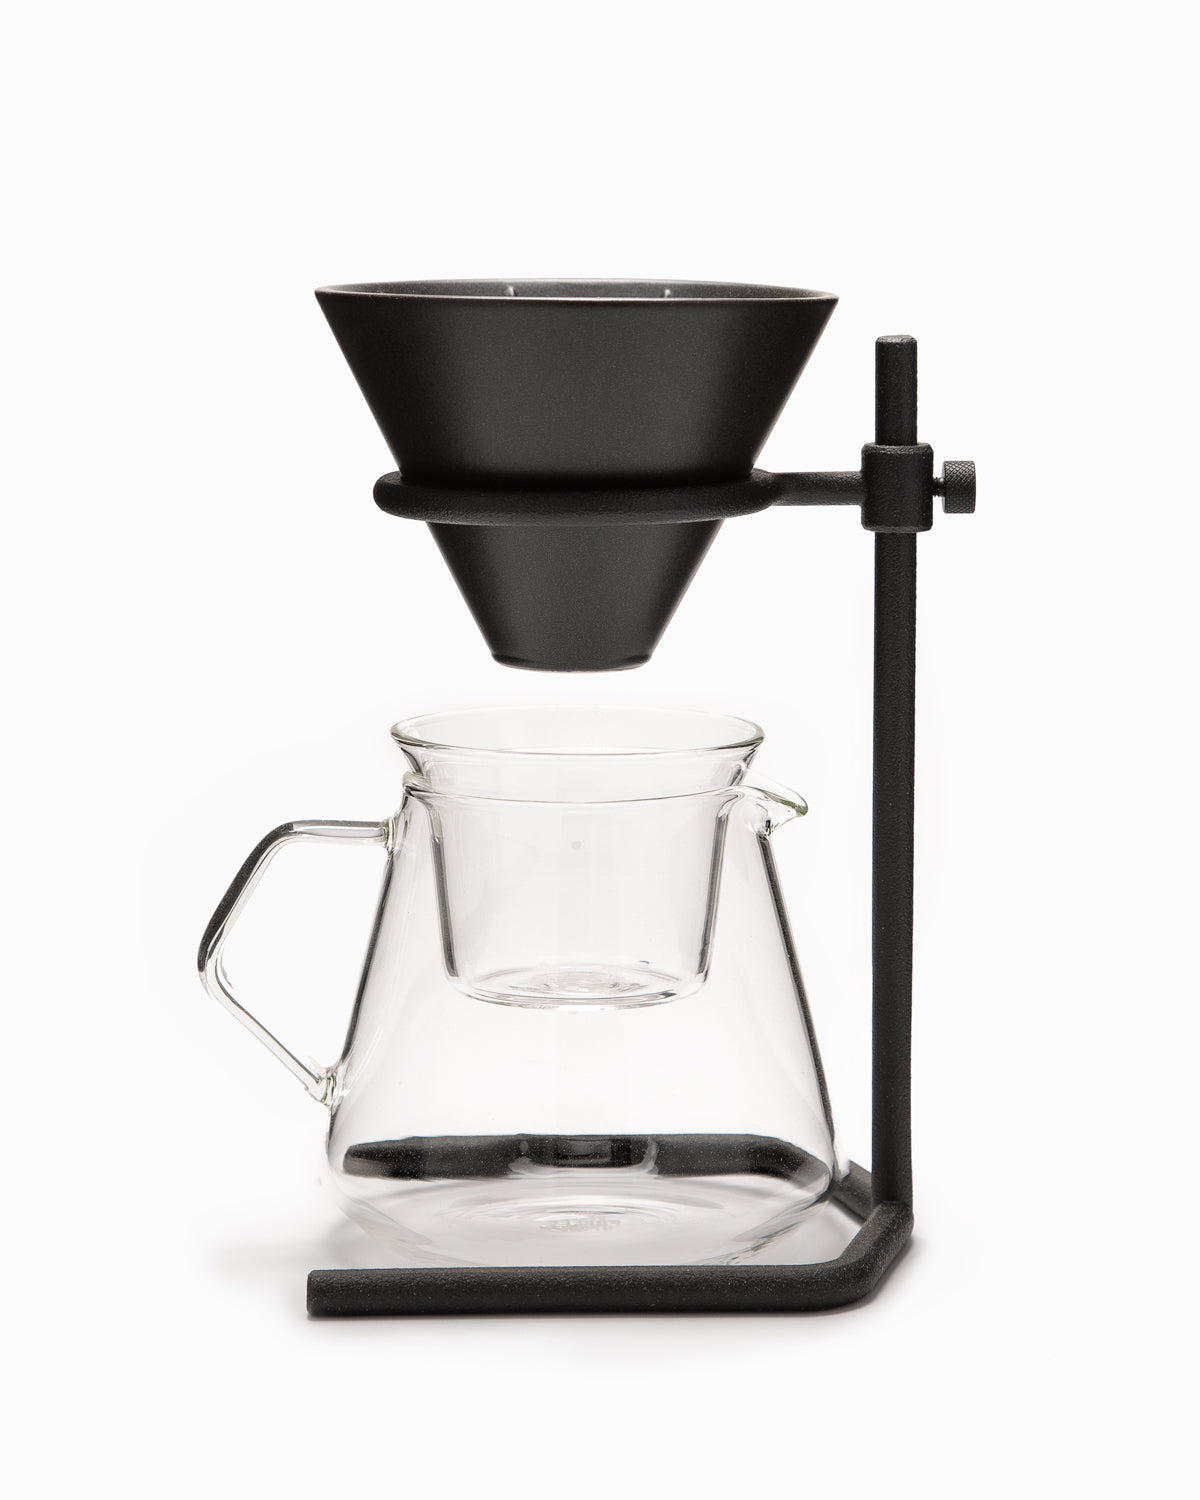 4 Cup Brewer Stand Set